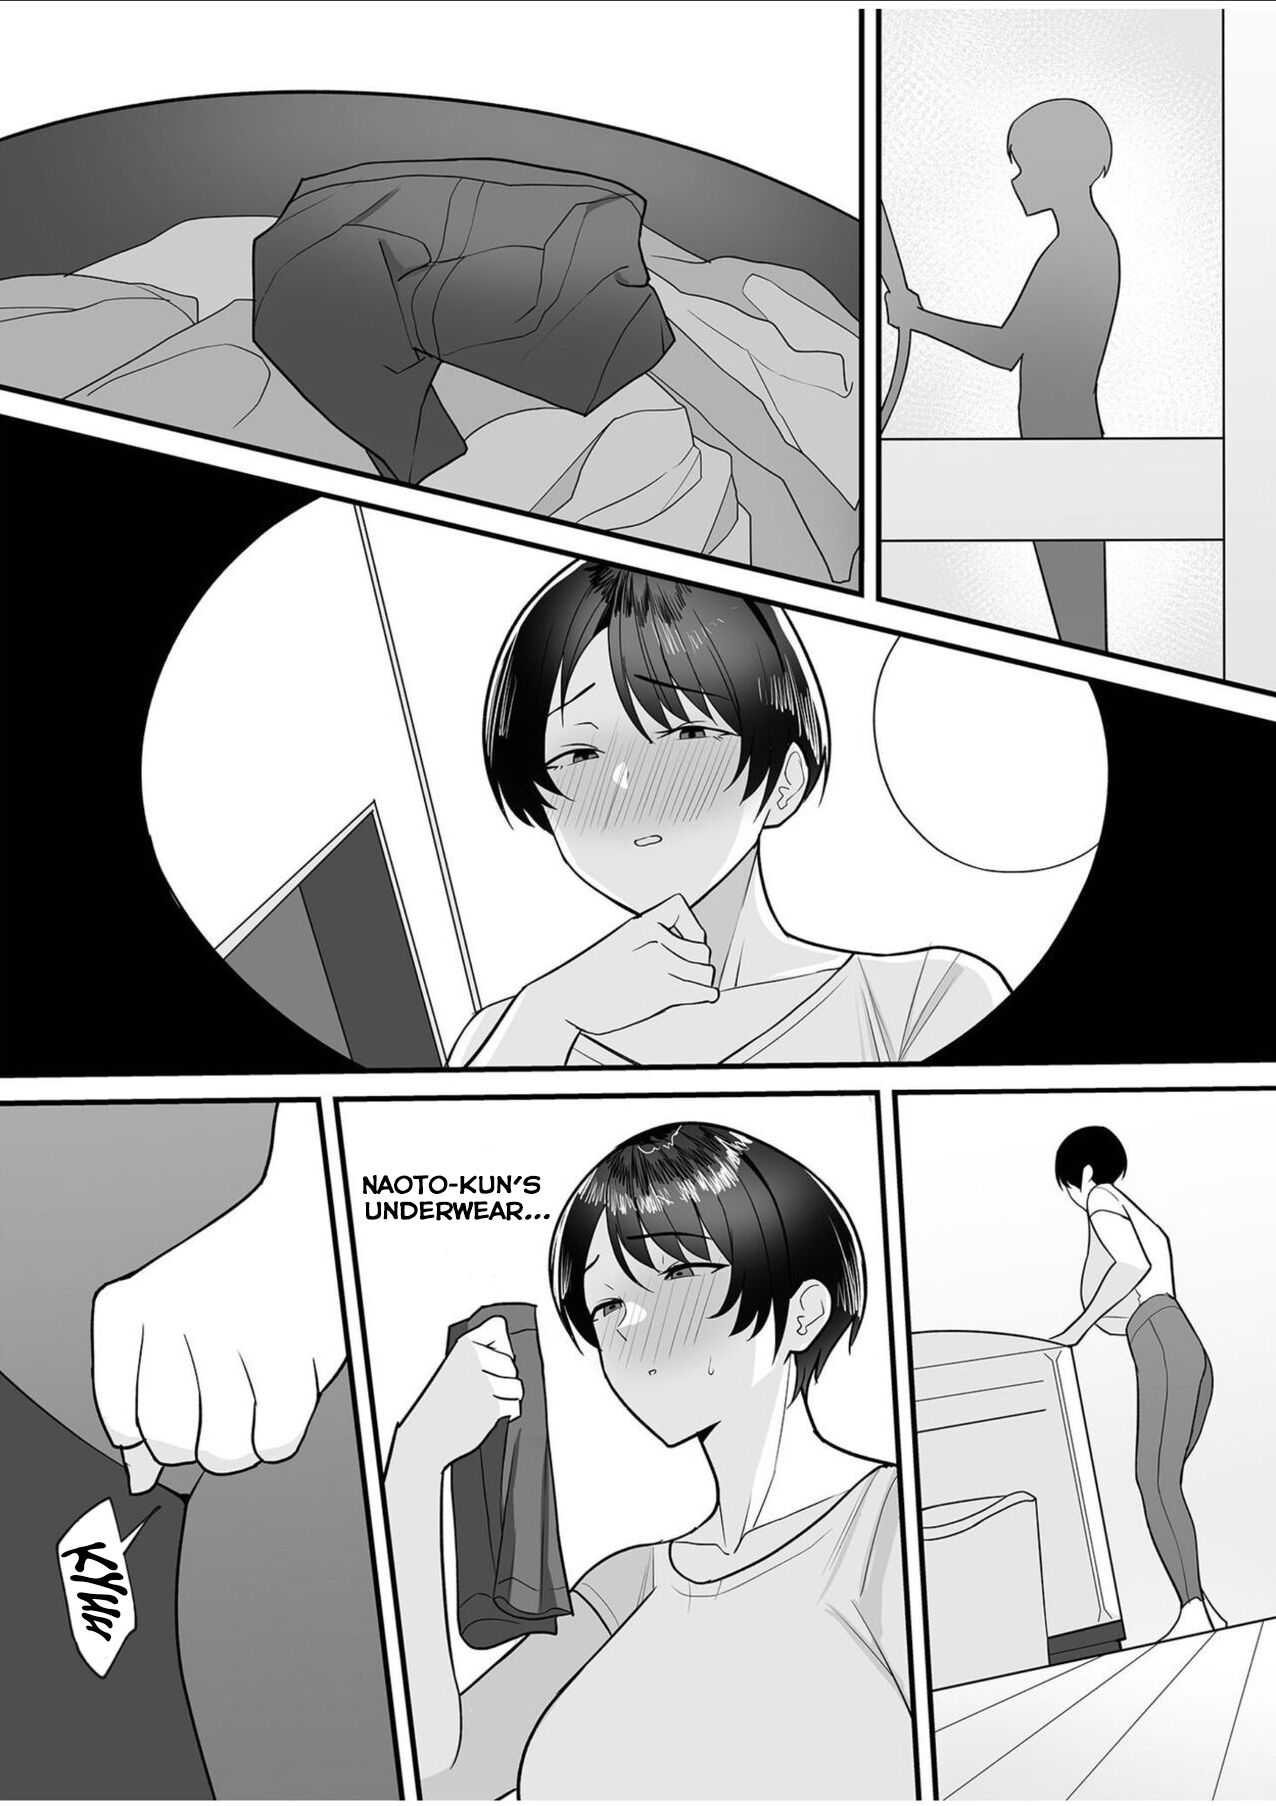 A step-mother inseki incest hentai manga by C-Kyuu. Mother-In-Law Is Mine [C-Kyuu] Porn Comic - Hinata Porn